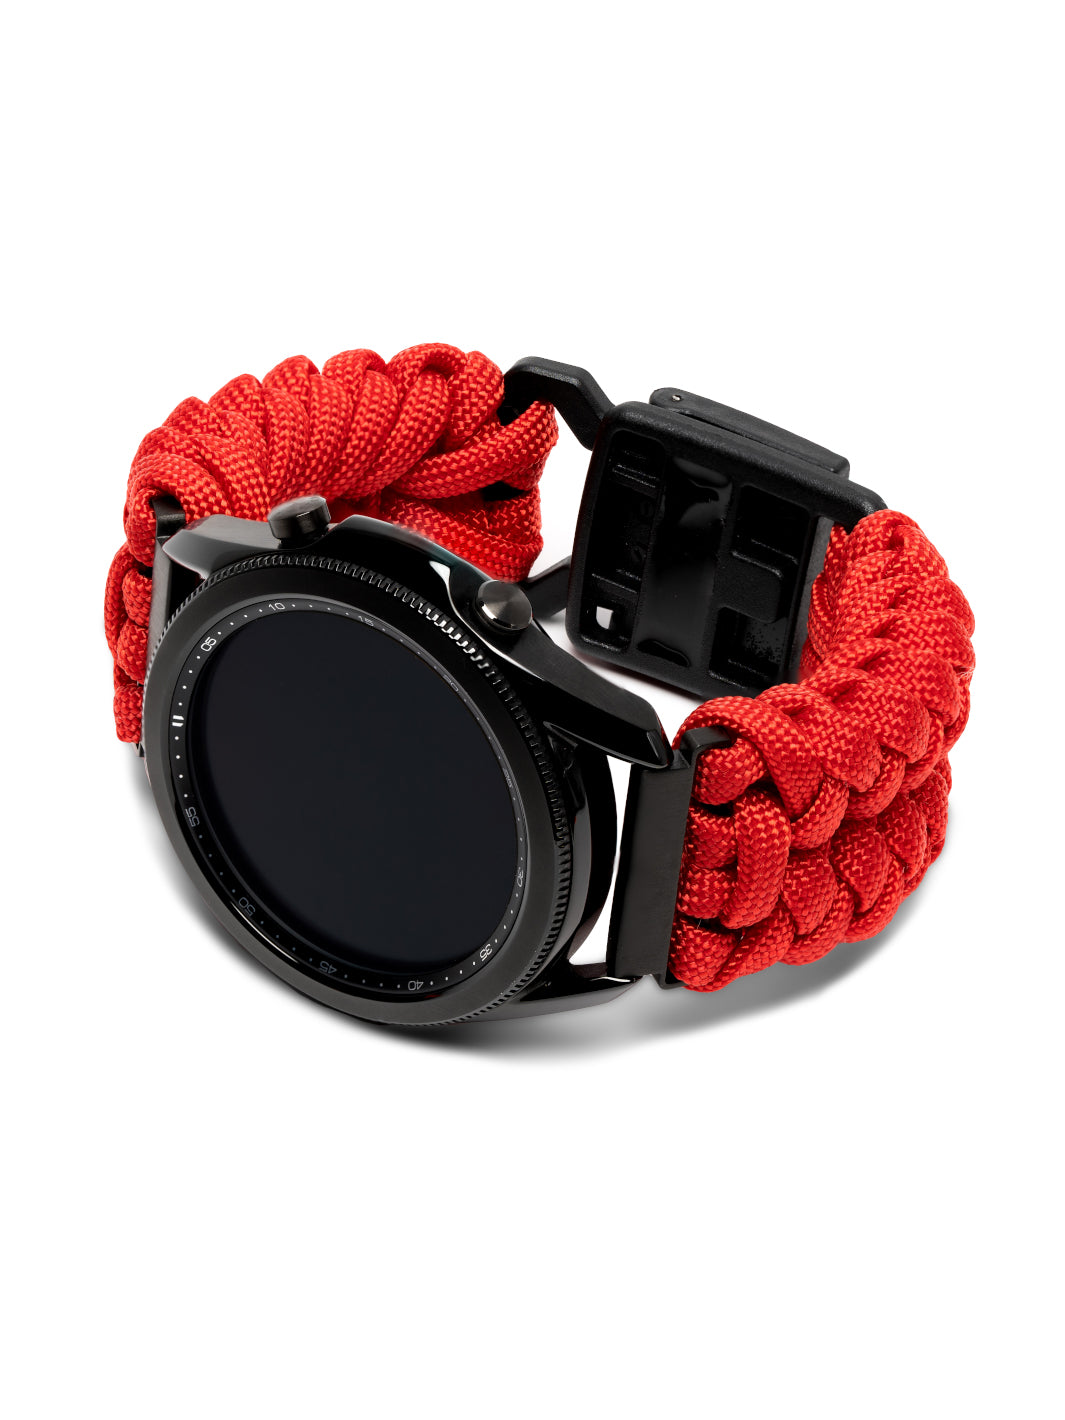 Handcrafted Samsung Galaxy Band Red - Blood - Watch – Strapcord Paracord